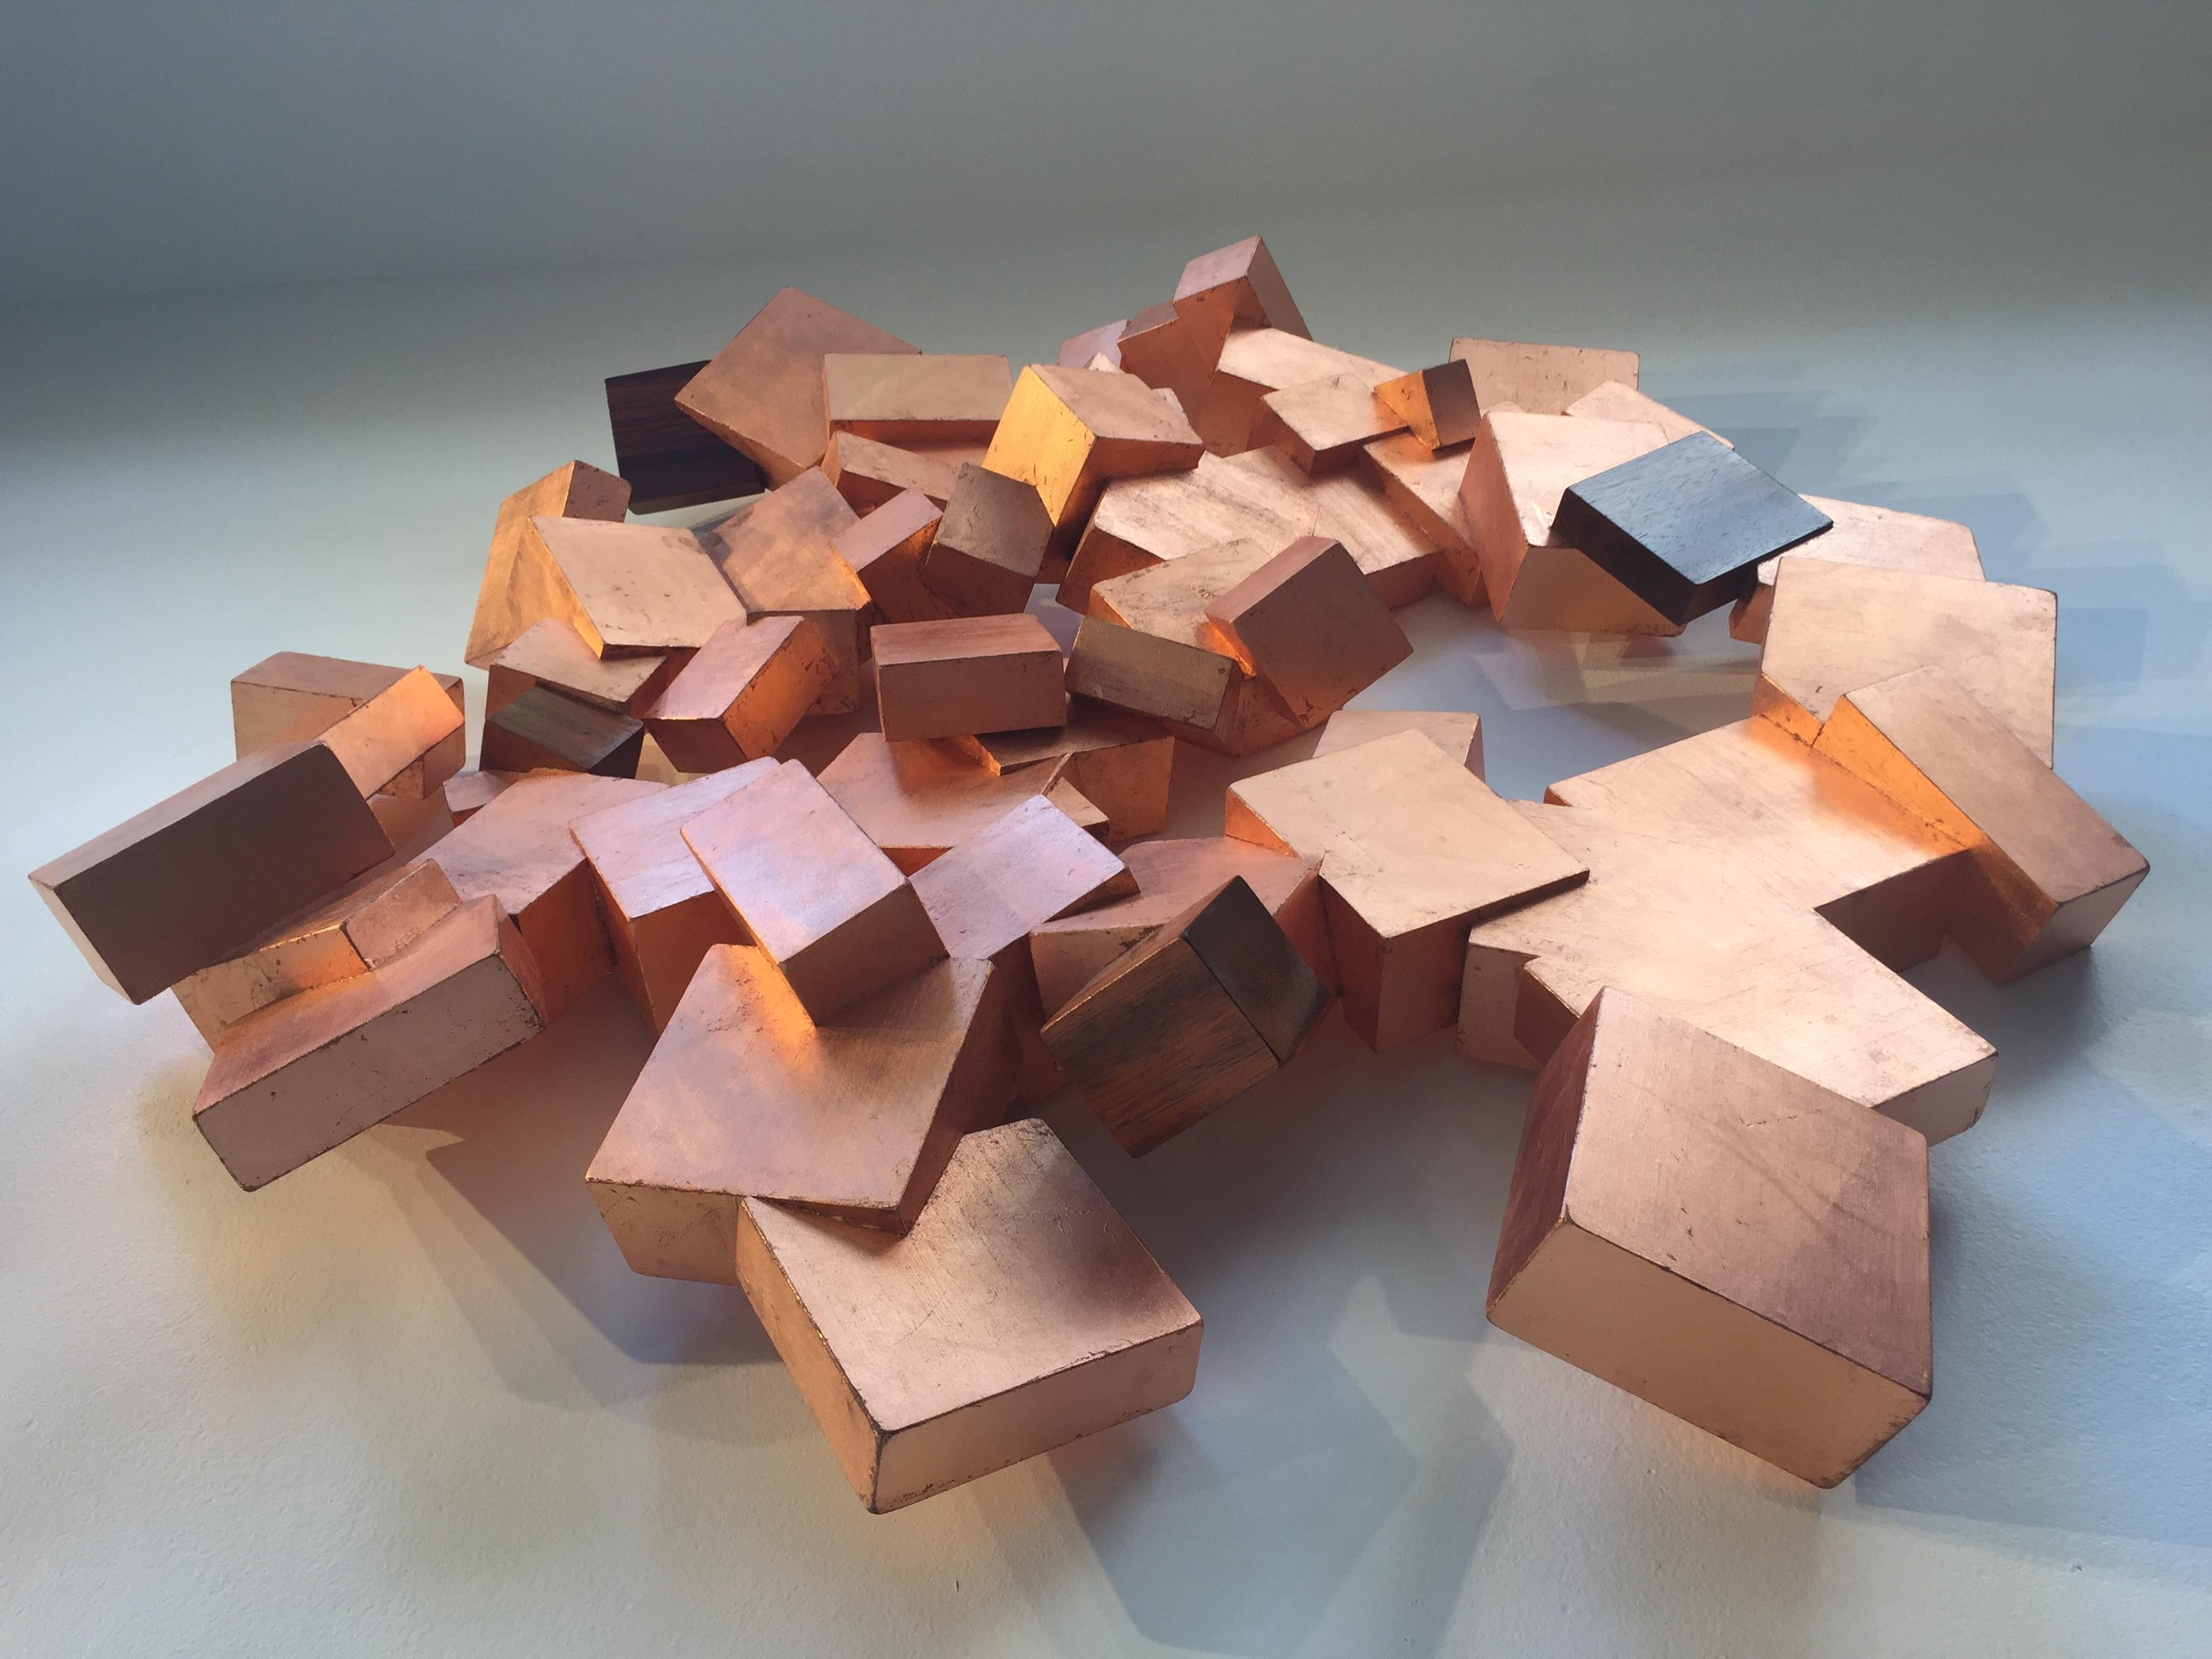 Copper and Boiree Pyrite (wood, metallic art, wall sculpture, cubic, geometric) - Abstract Geometric Sculpture by Chloe Hedden